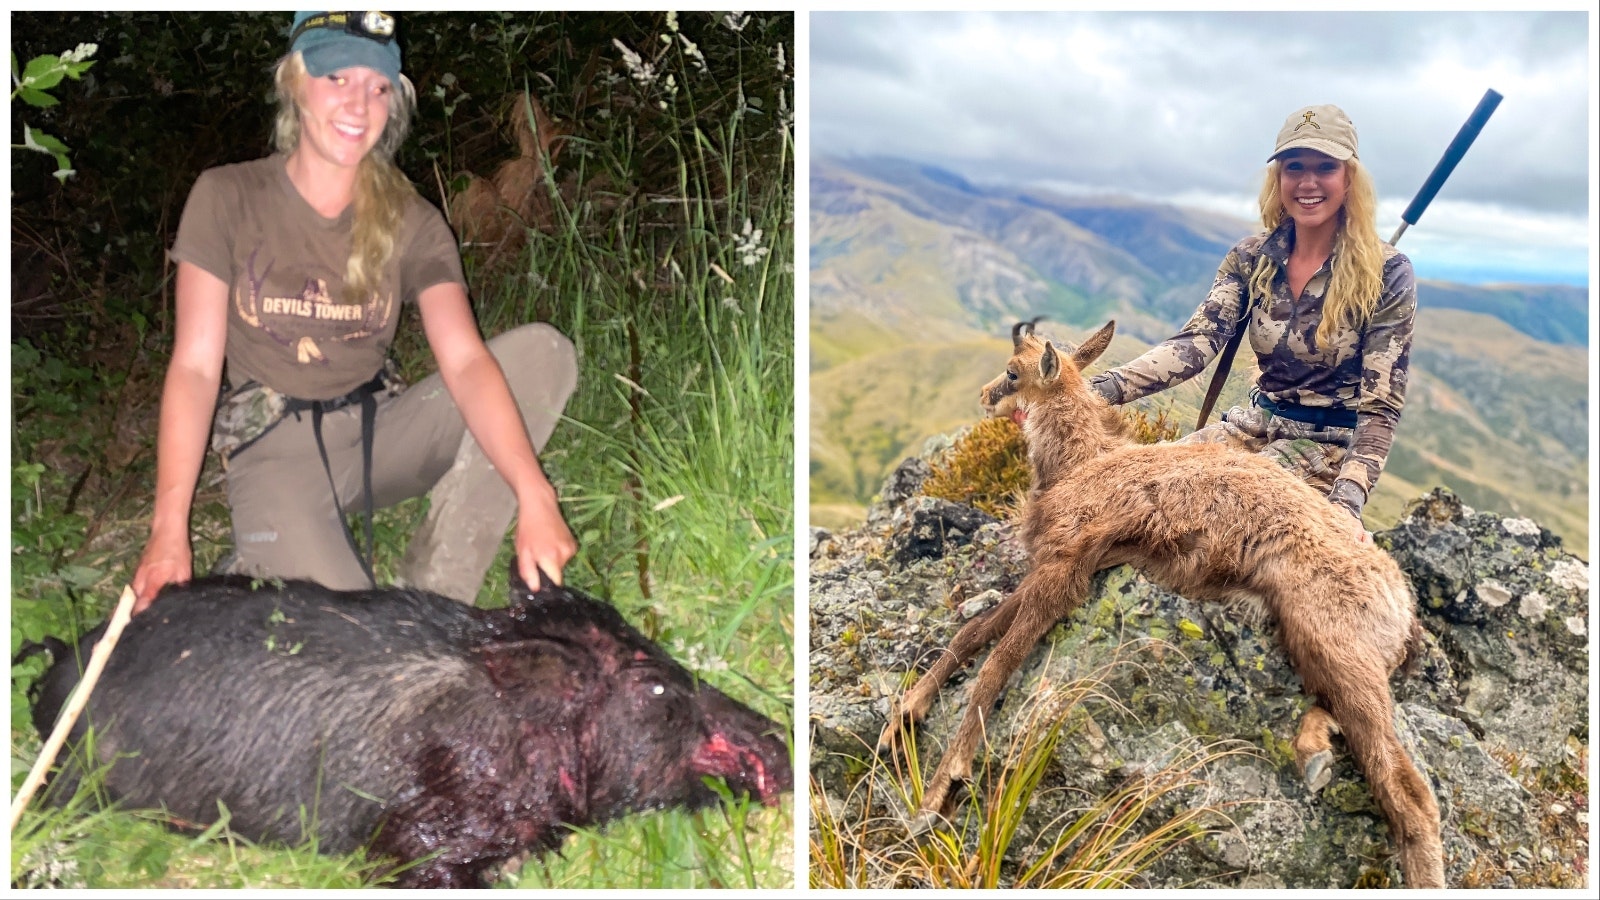 Samantha Strable of Pindedale killed this pig with a knife in New Zealand, where hunting feral swine with knives is a common practice. While in New Zealand, she also hunted chamois, a species of goat, right.